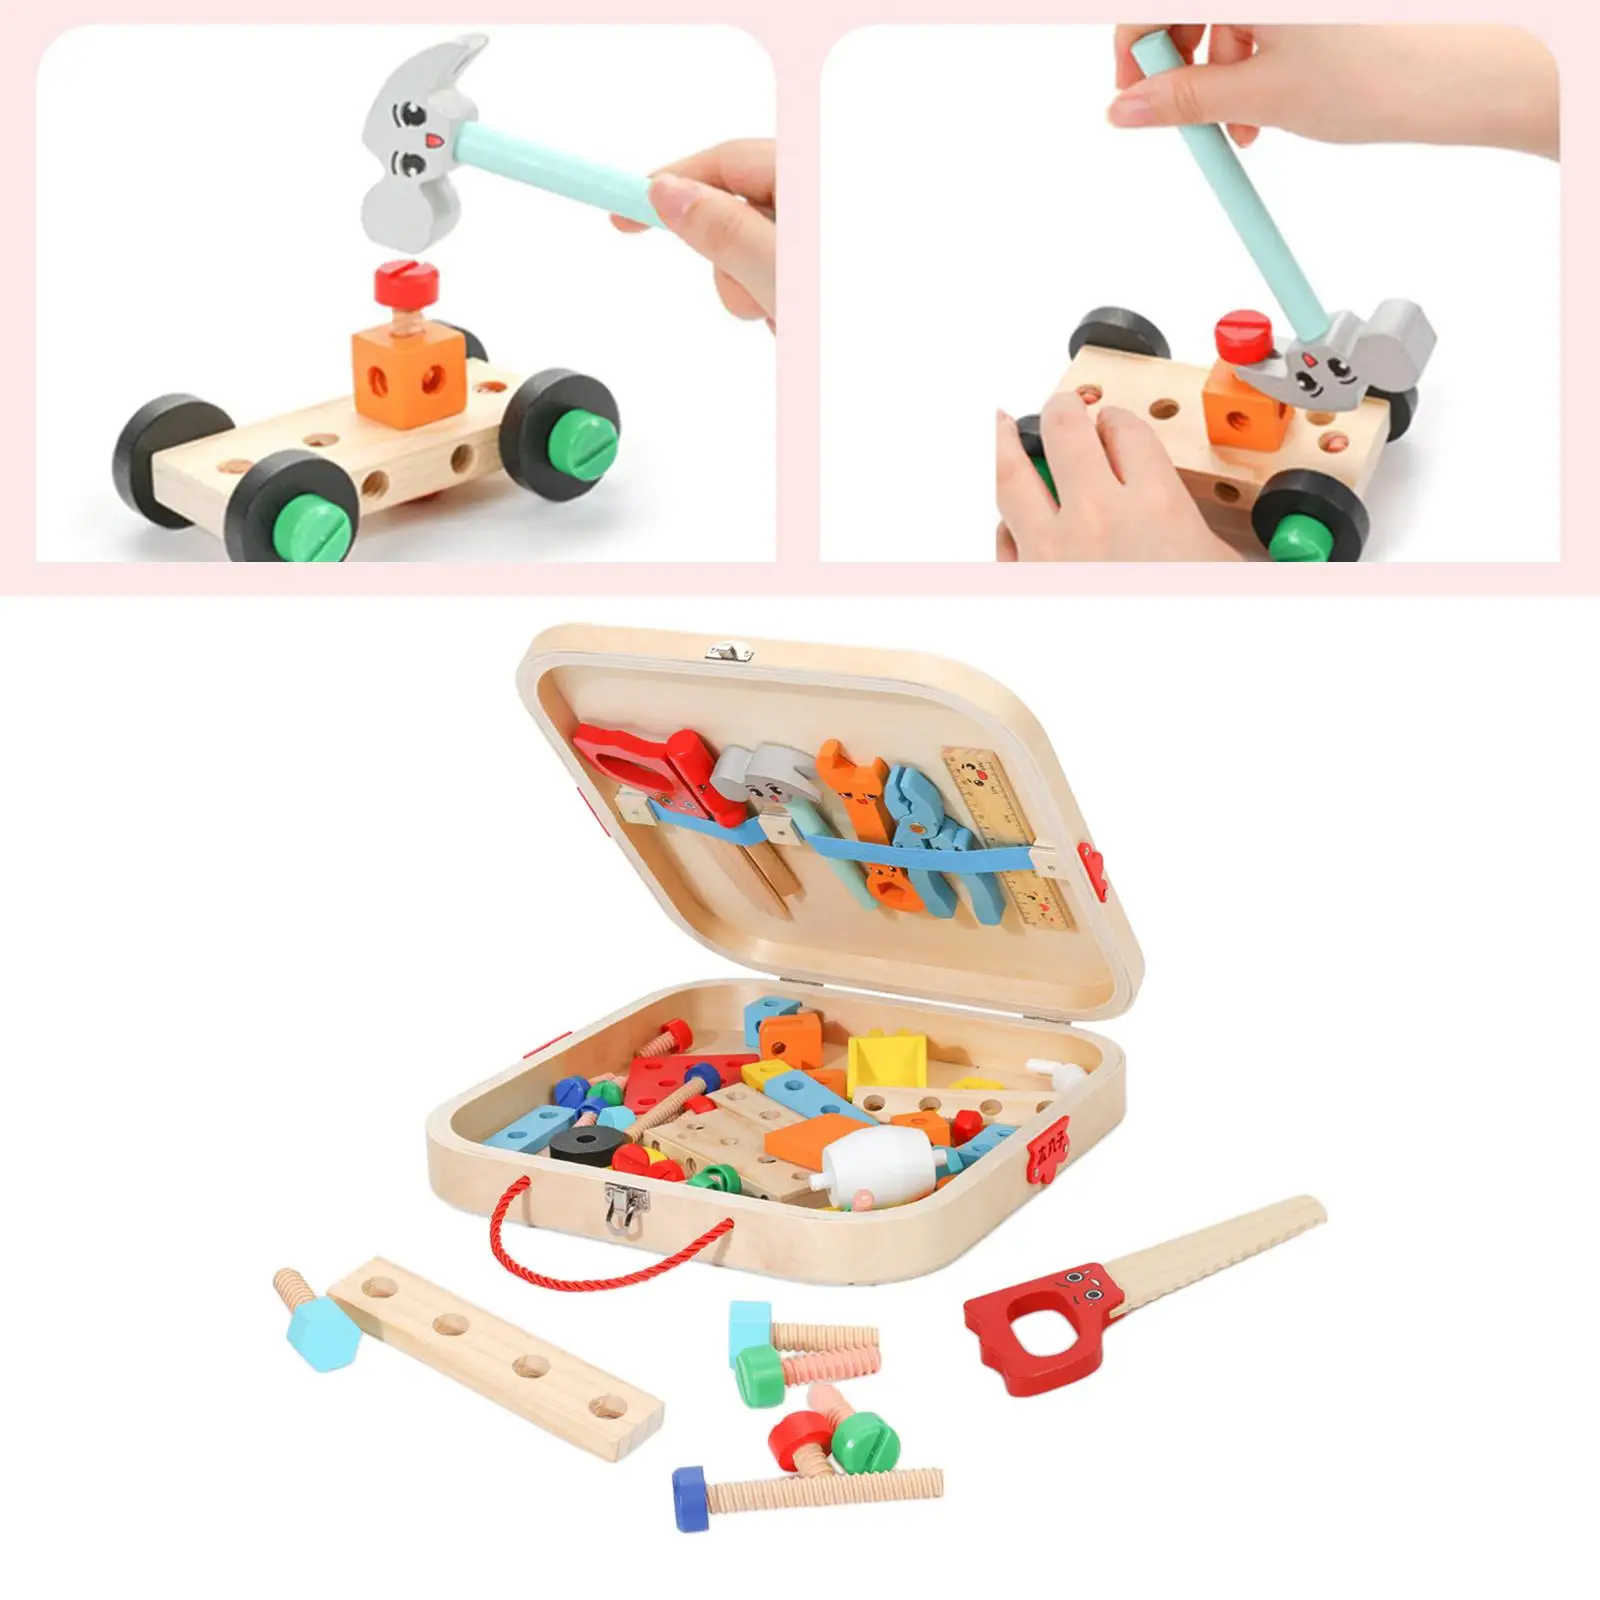 Tool Set for Kids, Wooden Tools Box Tool Set, Toddlers Wooden Tool Toy with Tools Box,